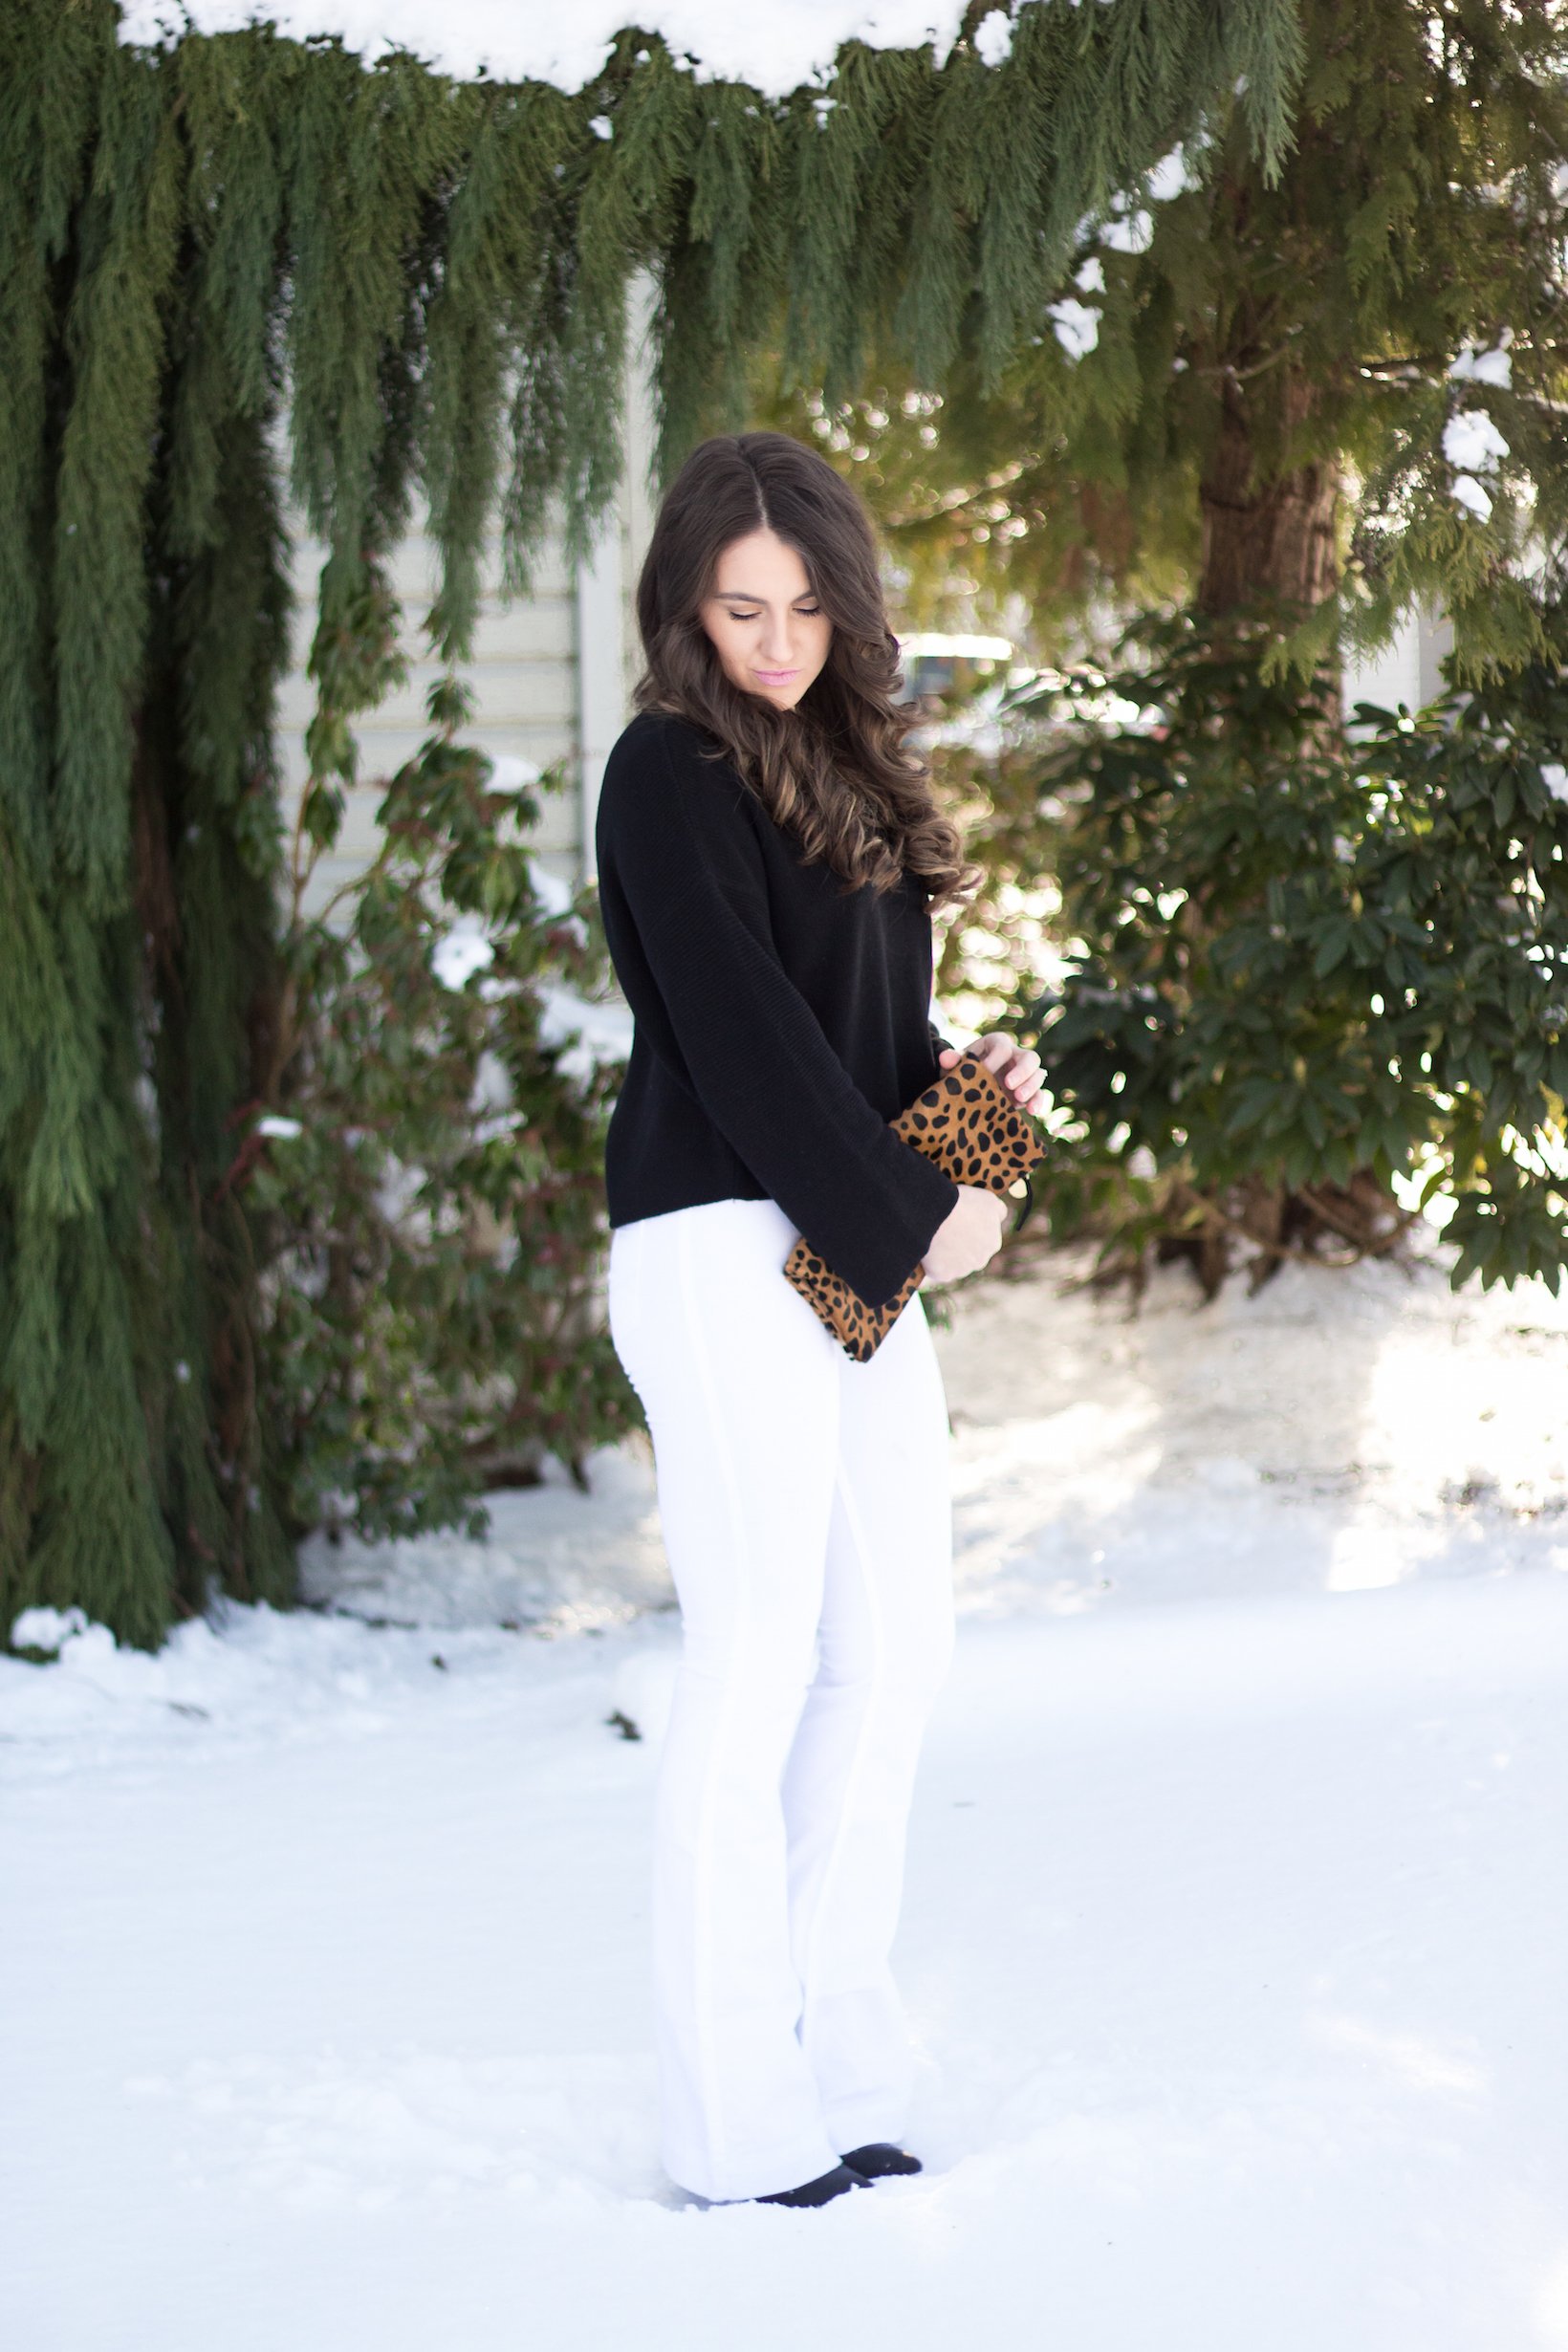 Winter white flares with black flared sleeve sweater for styling flares with confidence.